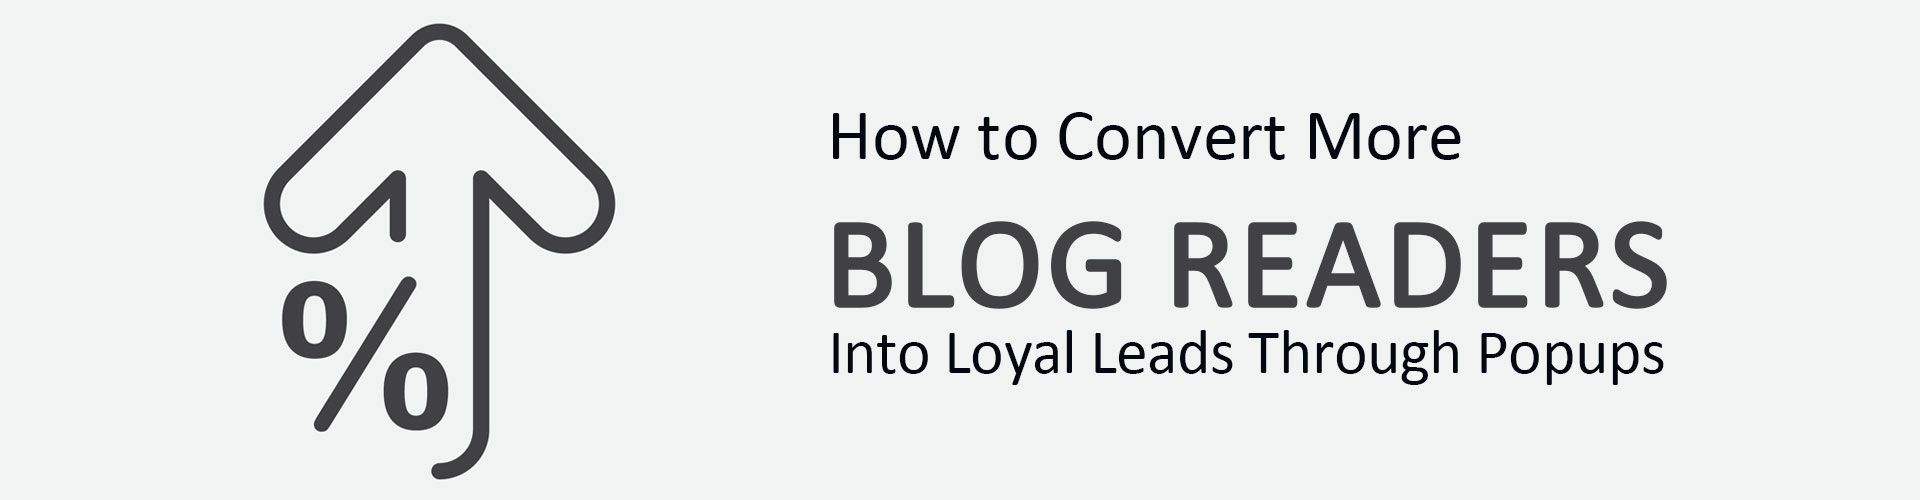 Convert Blog Readers into Leads Through Popups